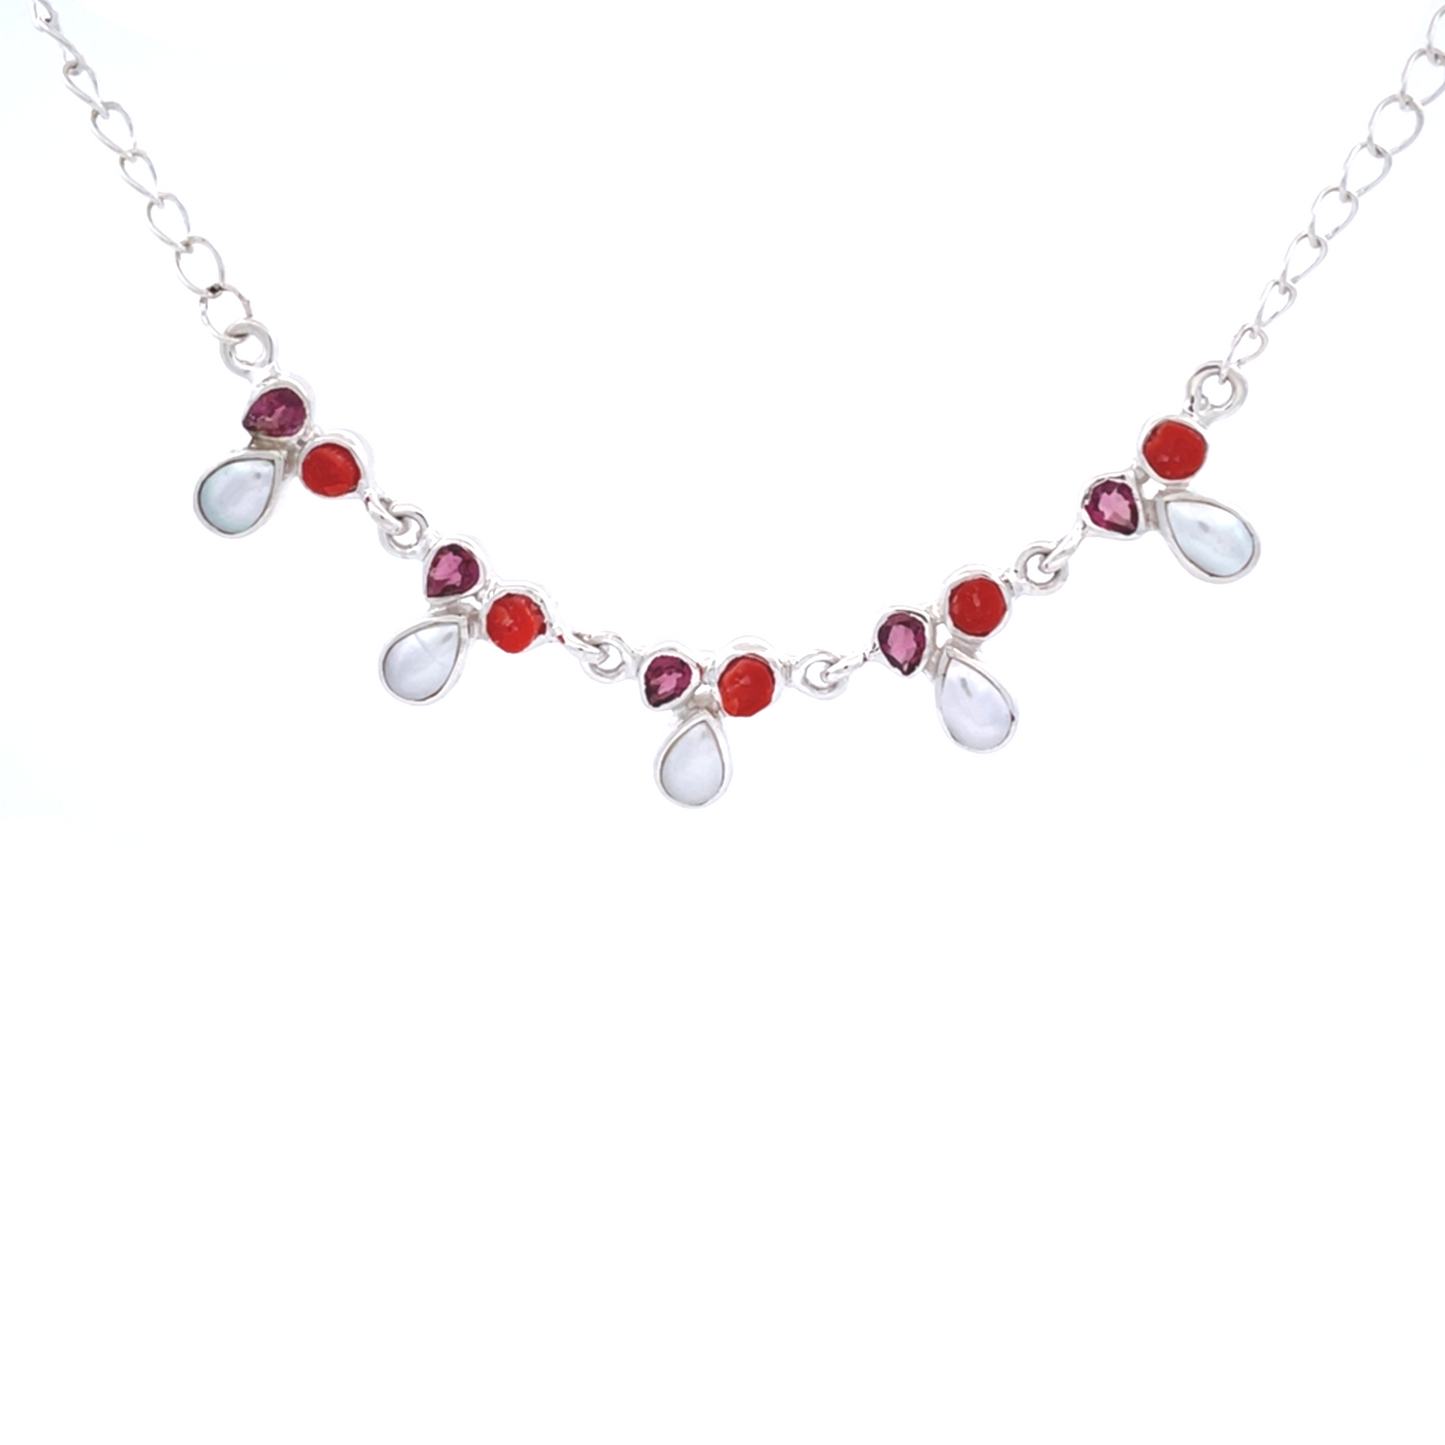 Pink Tourmaline Coral & Mabe Pearl Necklace